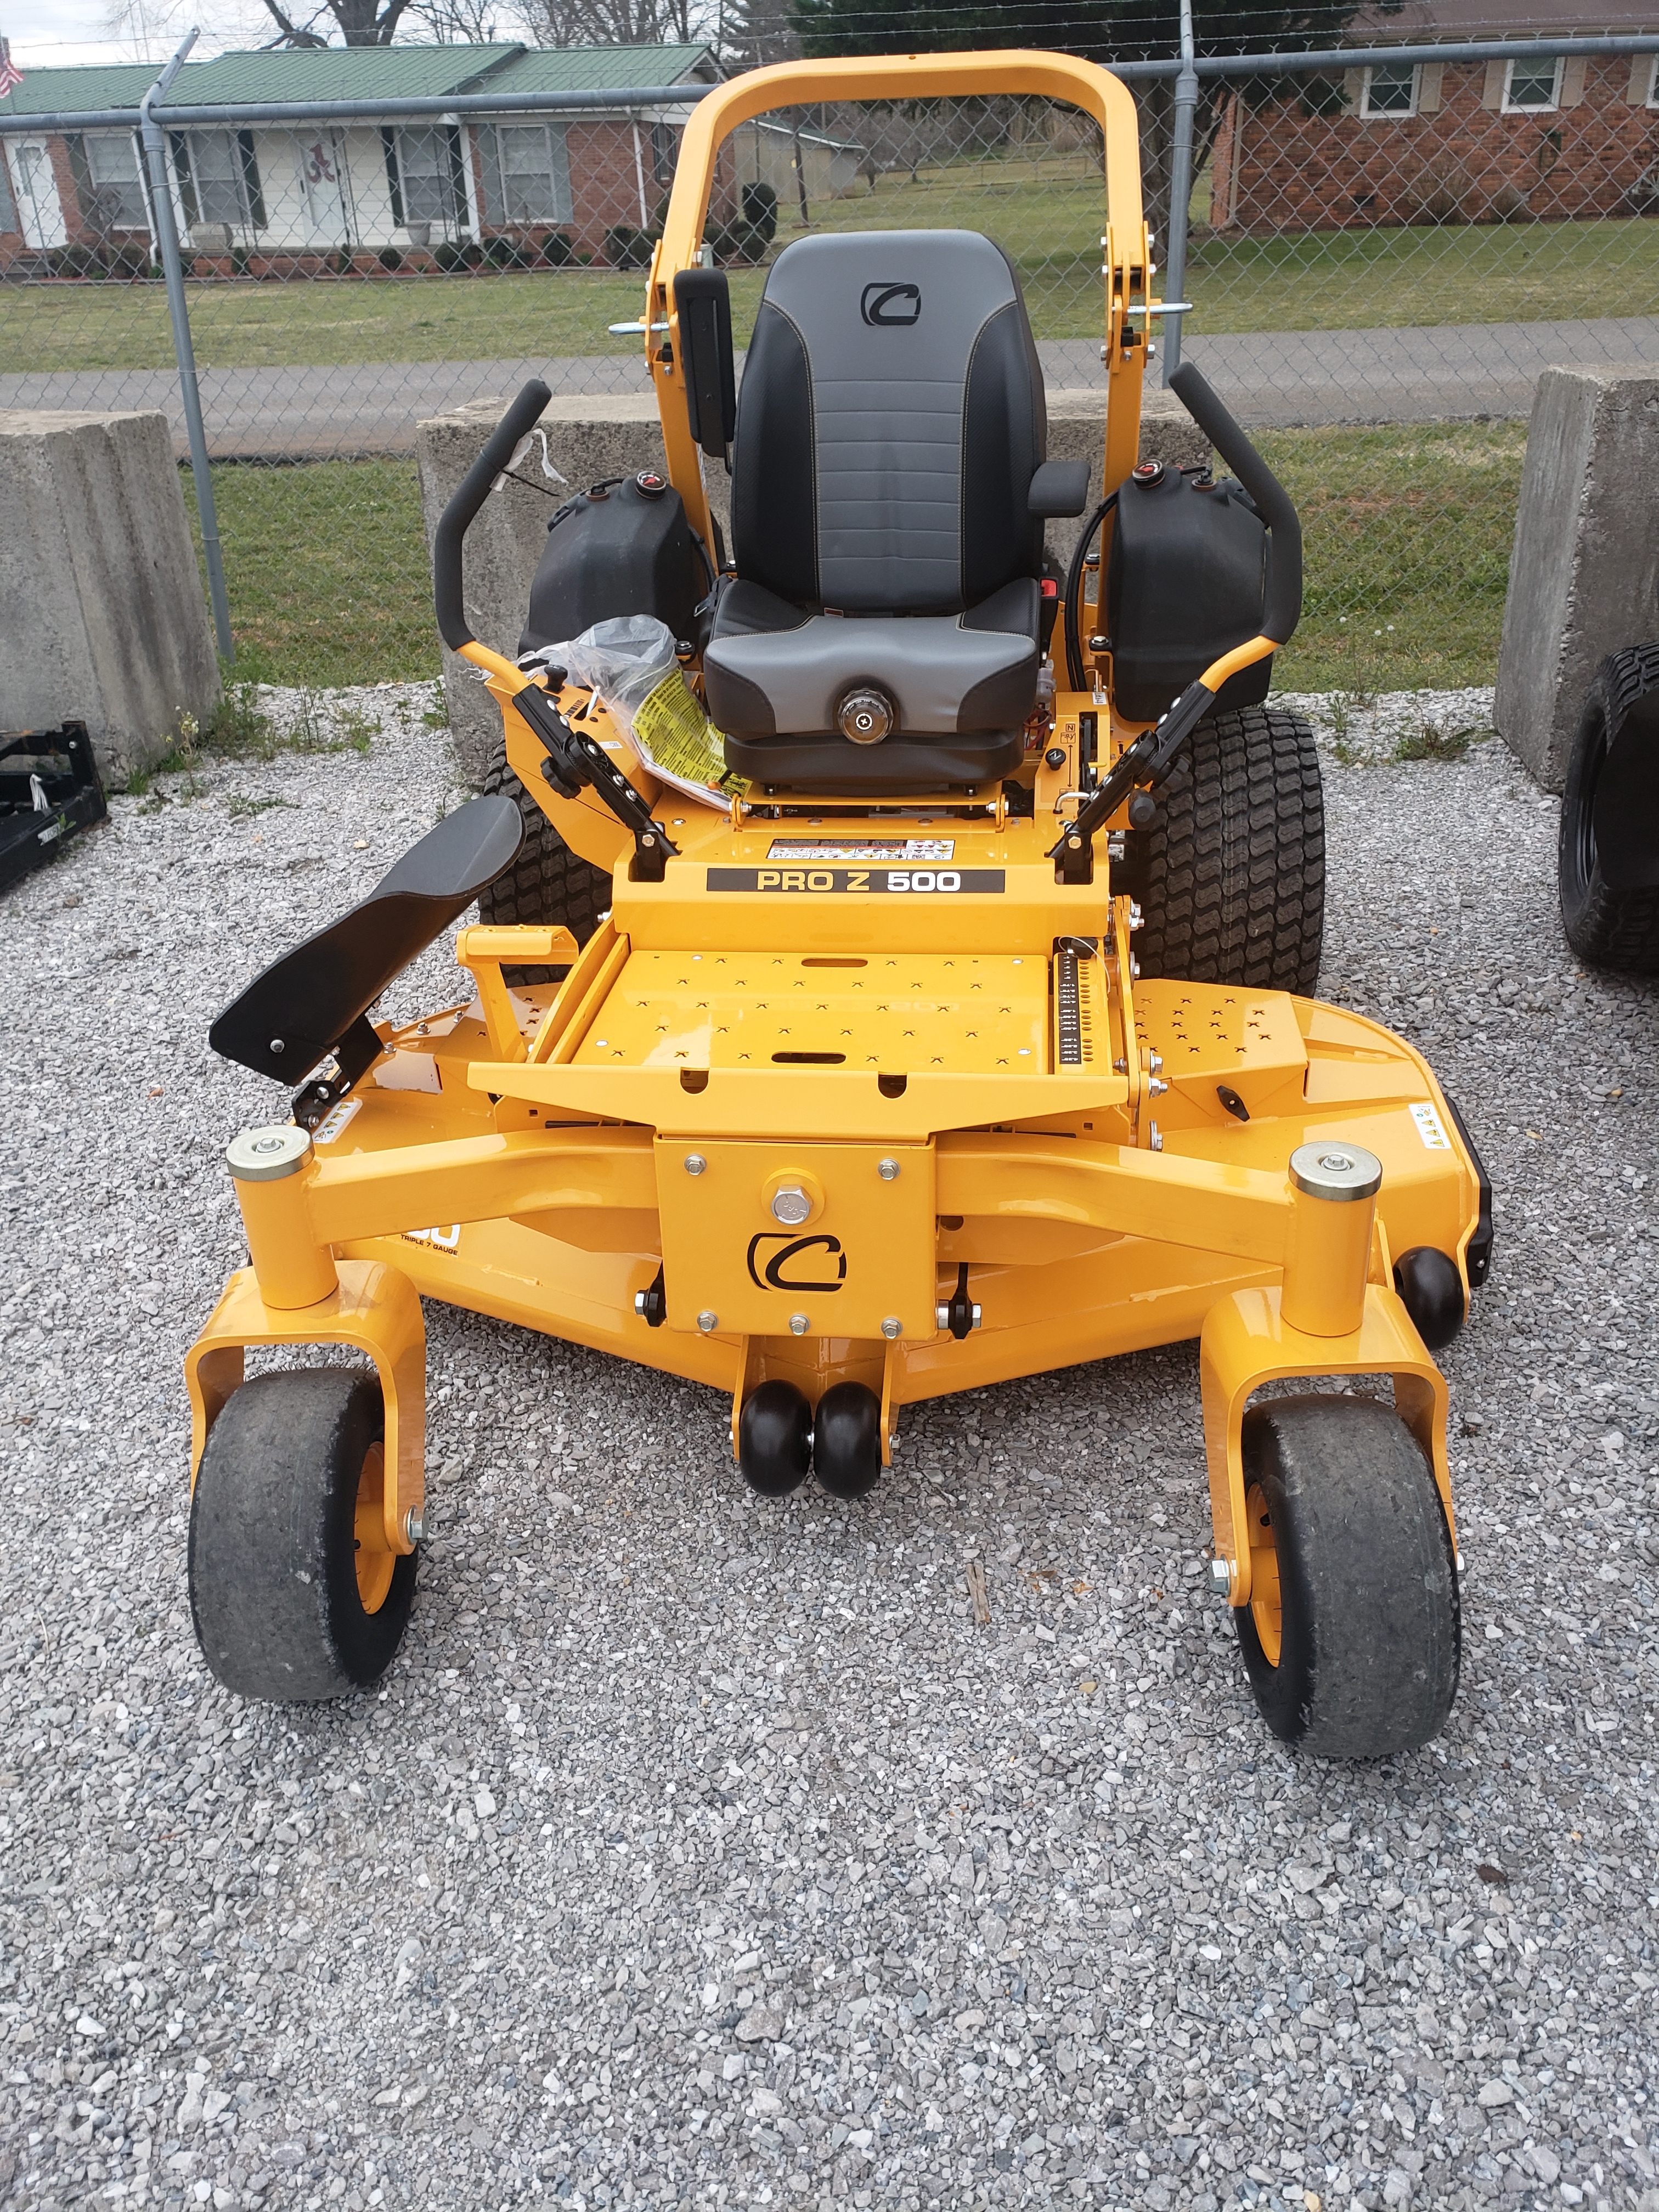 2022 Cub Cadet Commercial Zero Turn Mowers PRO Z 560 L KW at Shoals Outdoor Sports